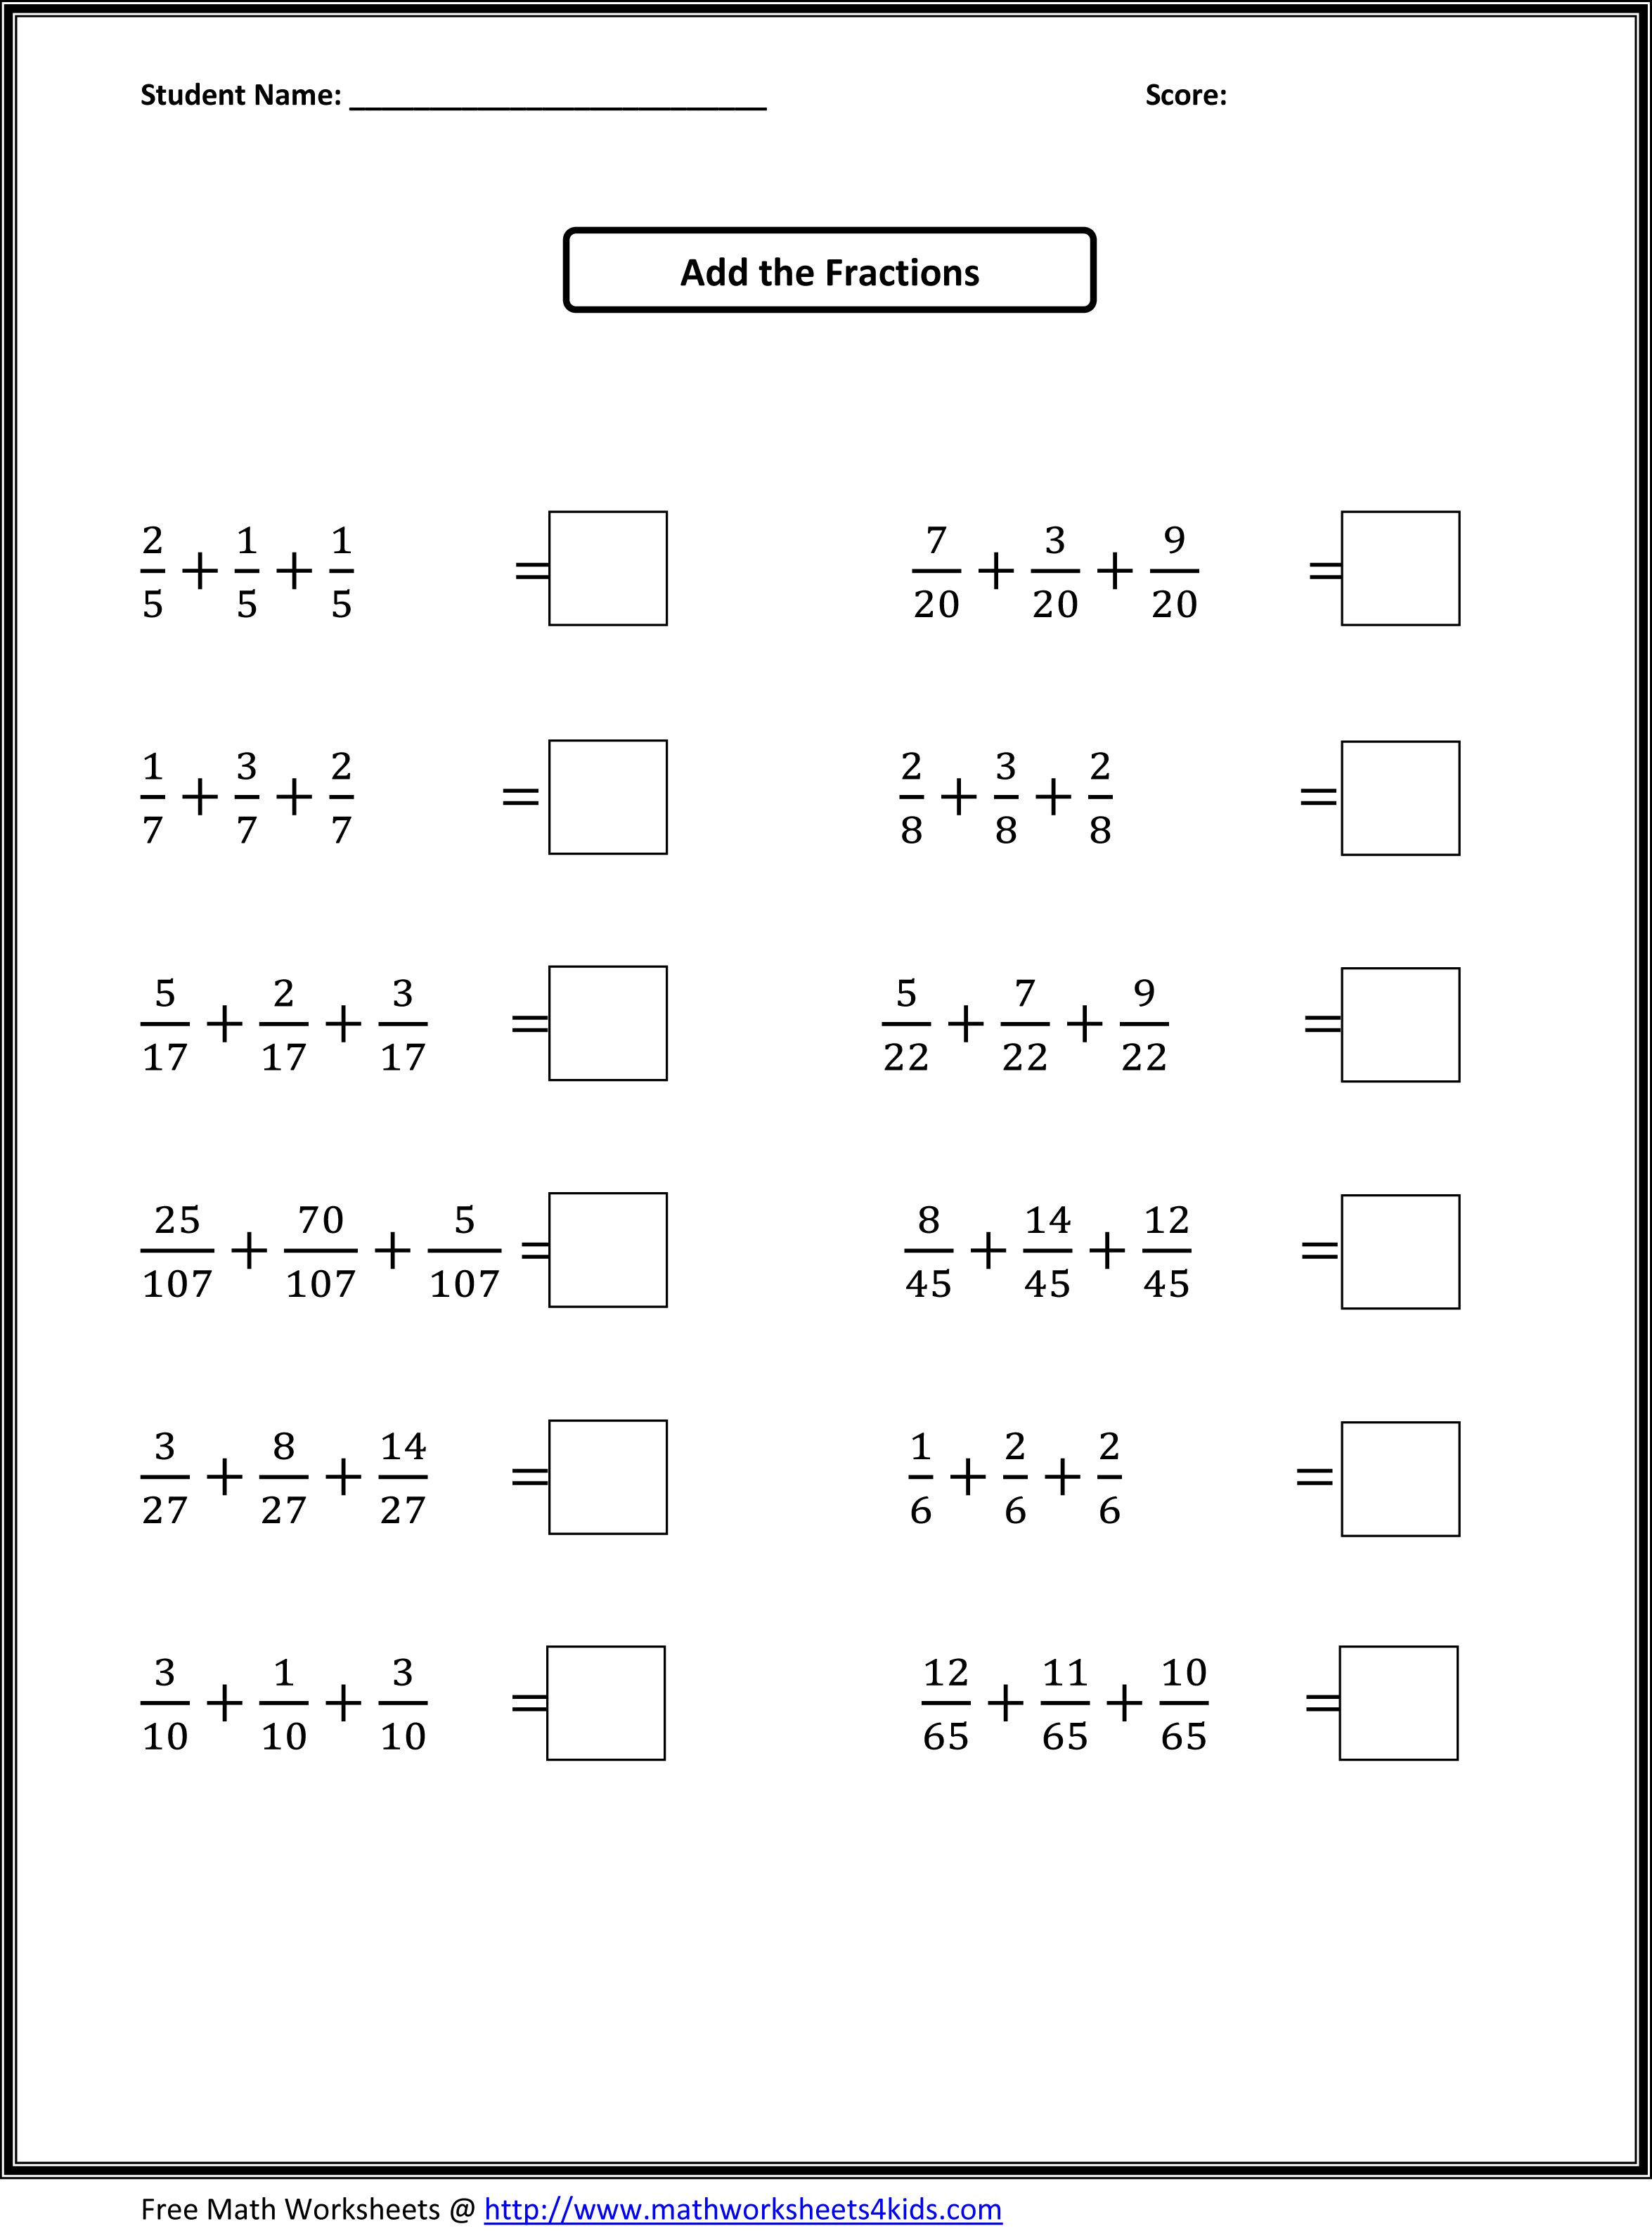 Equivalent Fraction Worksheets 5th Grade Printable Worksheets by Grade Level and by Skill